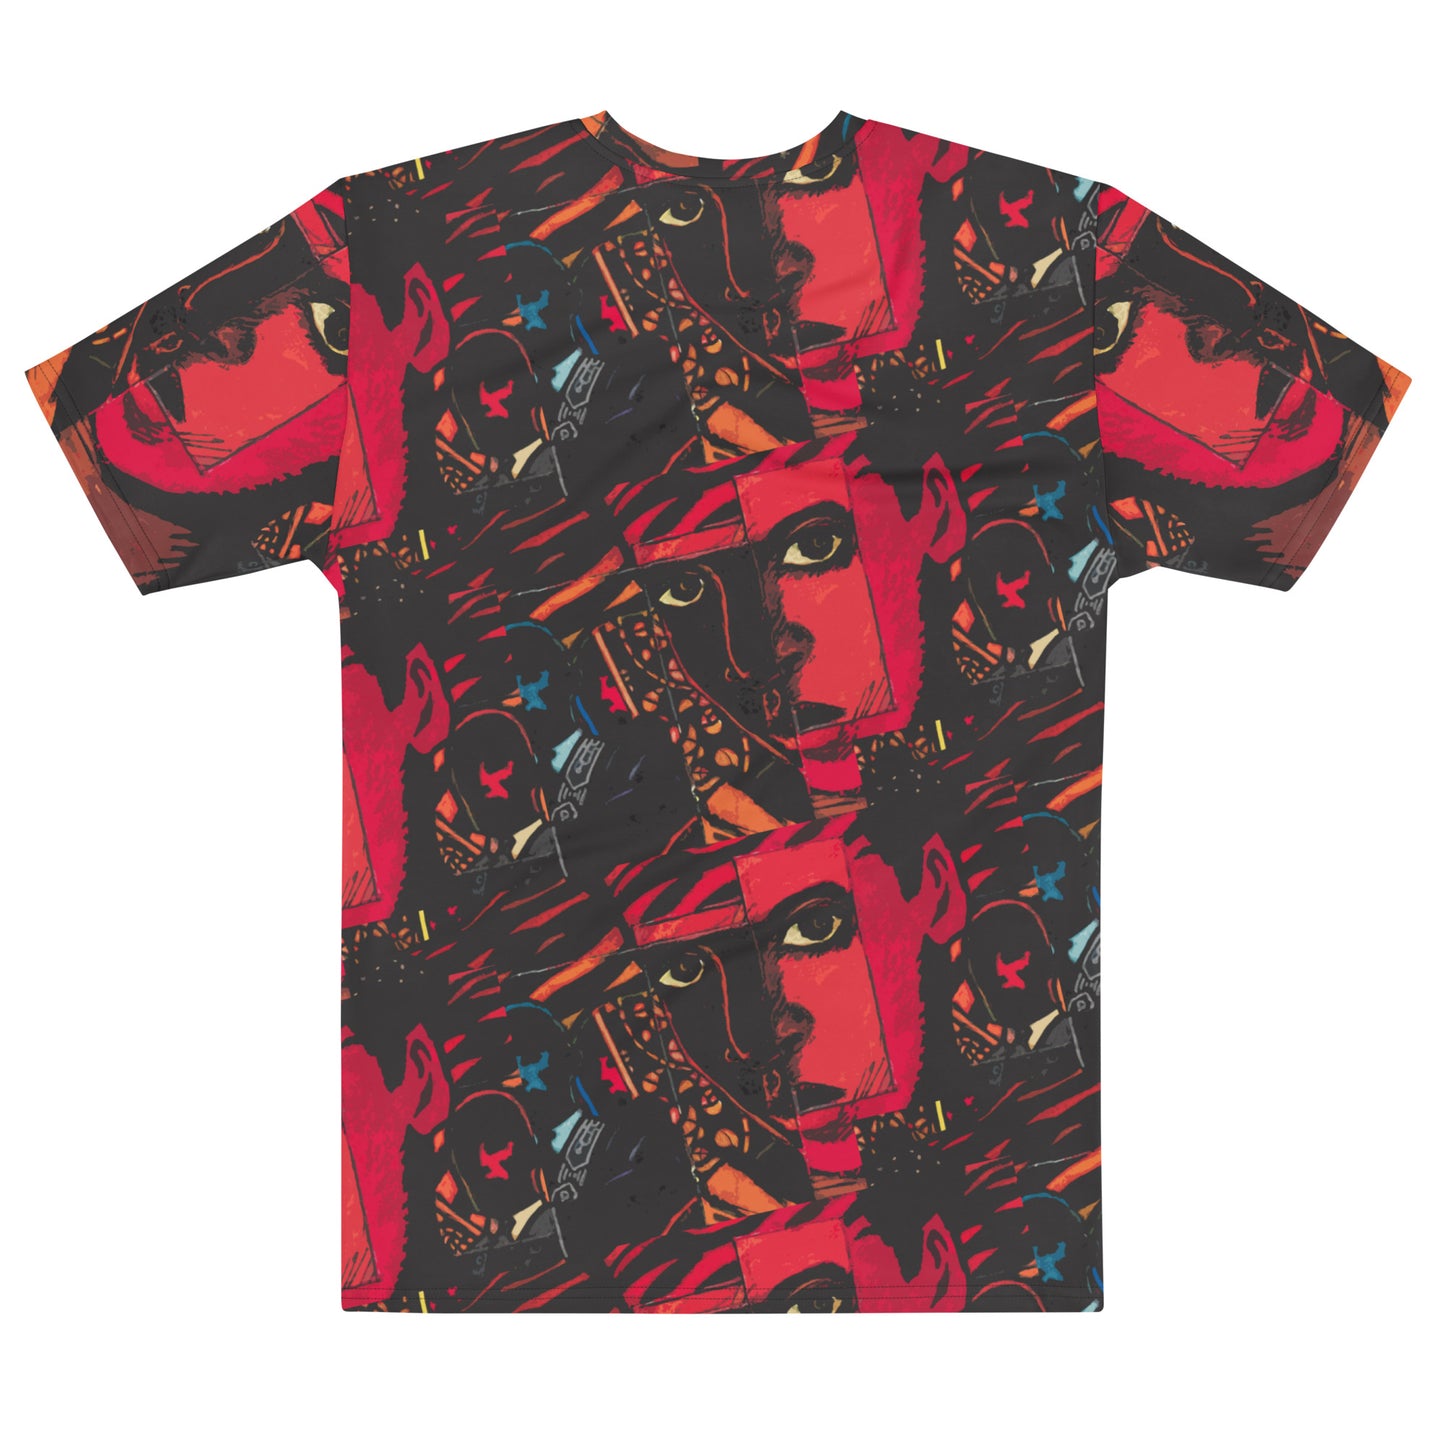 "2" from "BOY" collection by Archie Veale Men's t-shirt